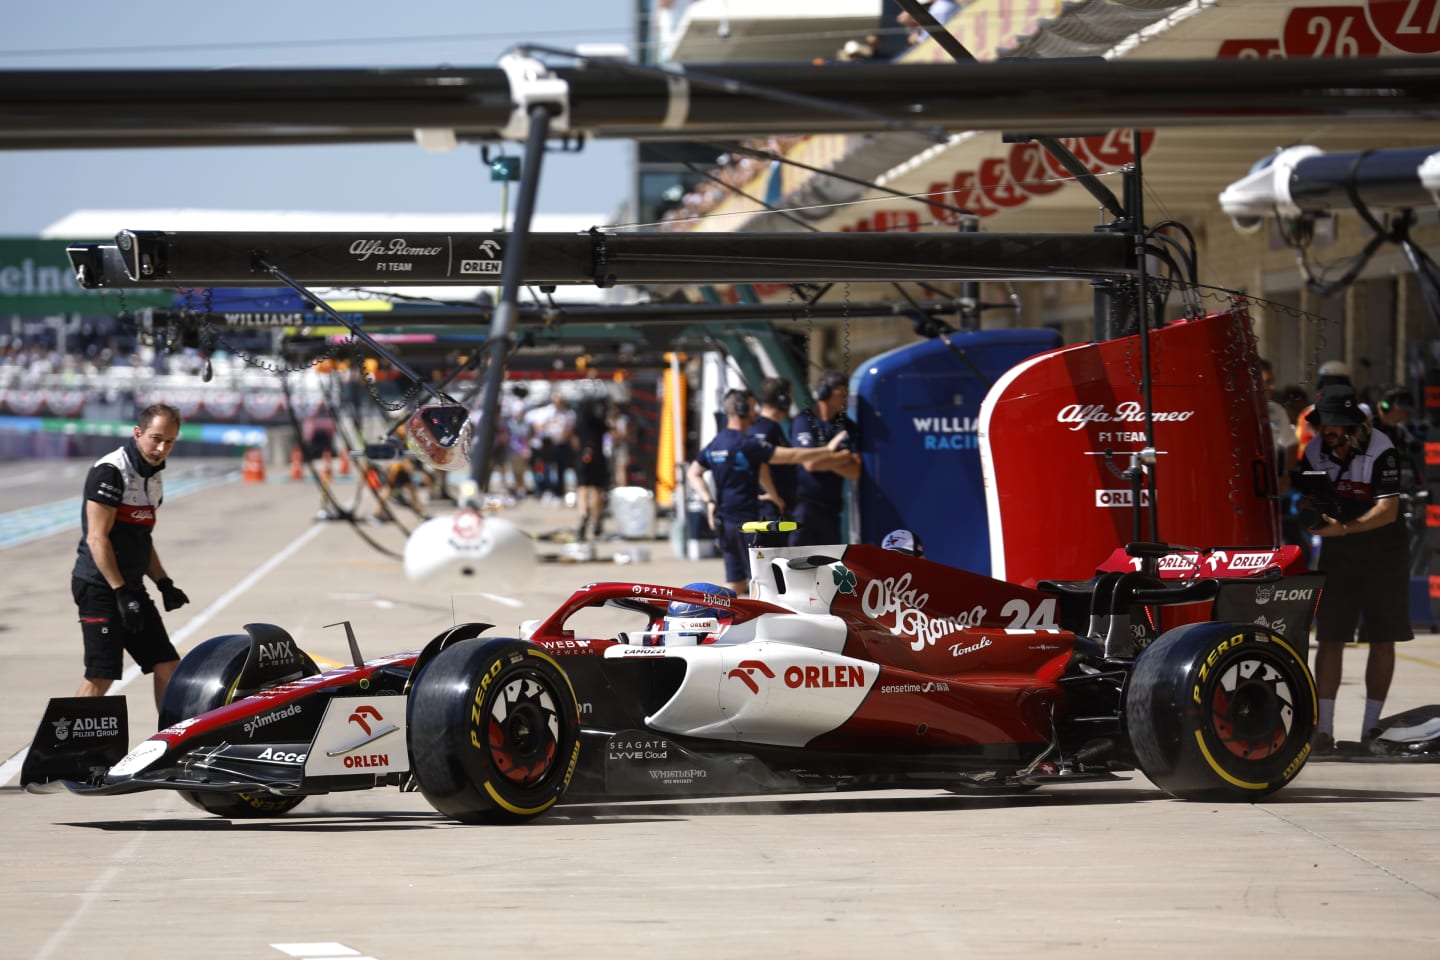 AUSTIN, TEXAS - OCTOBER 21: Zhou Guanyu of China driving the (24) Alfa Romeo F1 C42 Ferrari in the Pitlane during practice ahead of the F1 Grand Prix of USA at Circuit of The Americas on October 21, 2022 in Austin, Texas. (Photo by Chris Graythen/Getty Images)